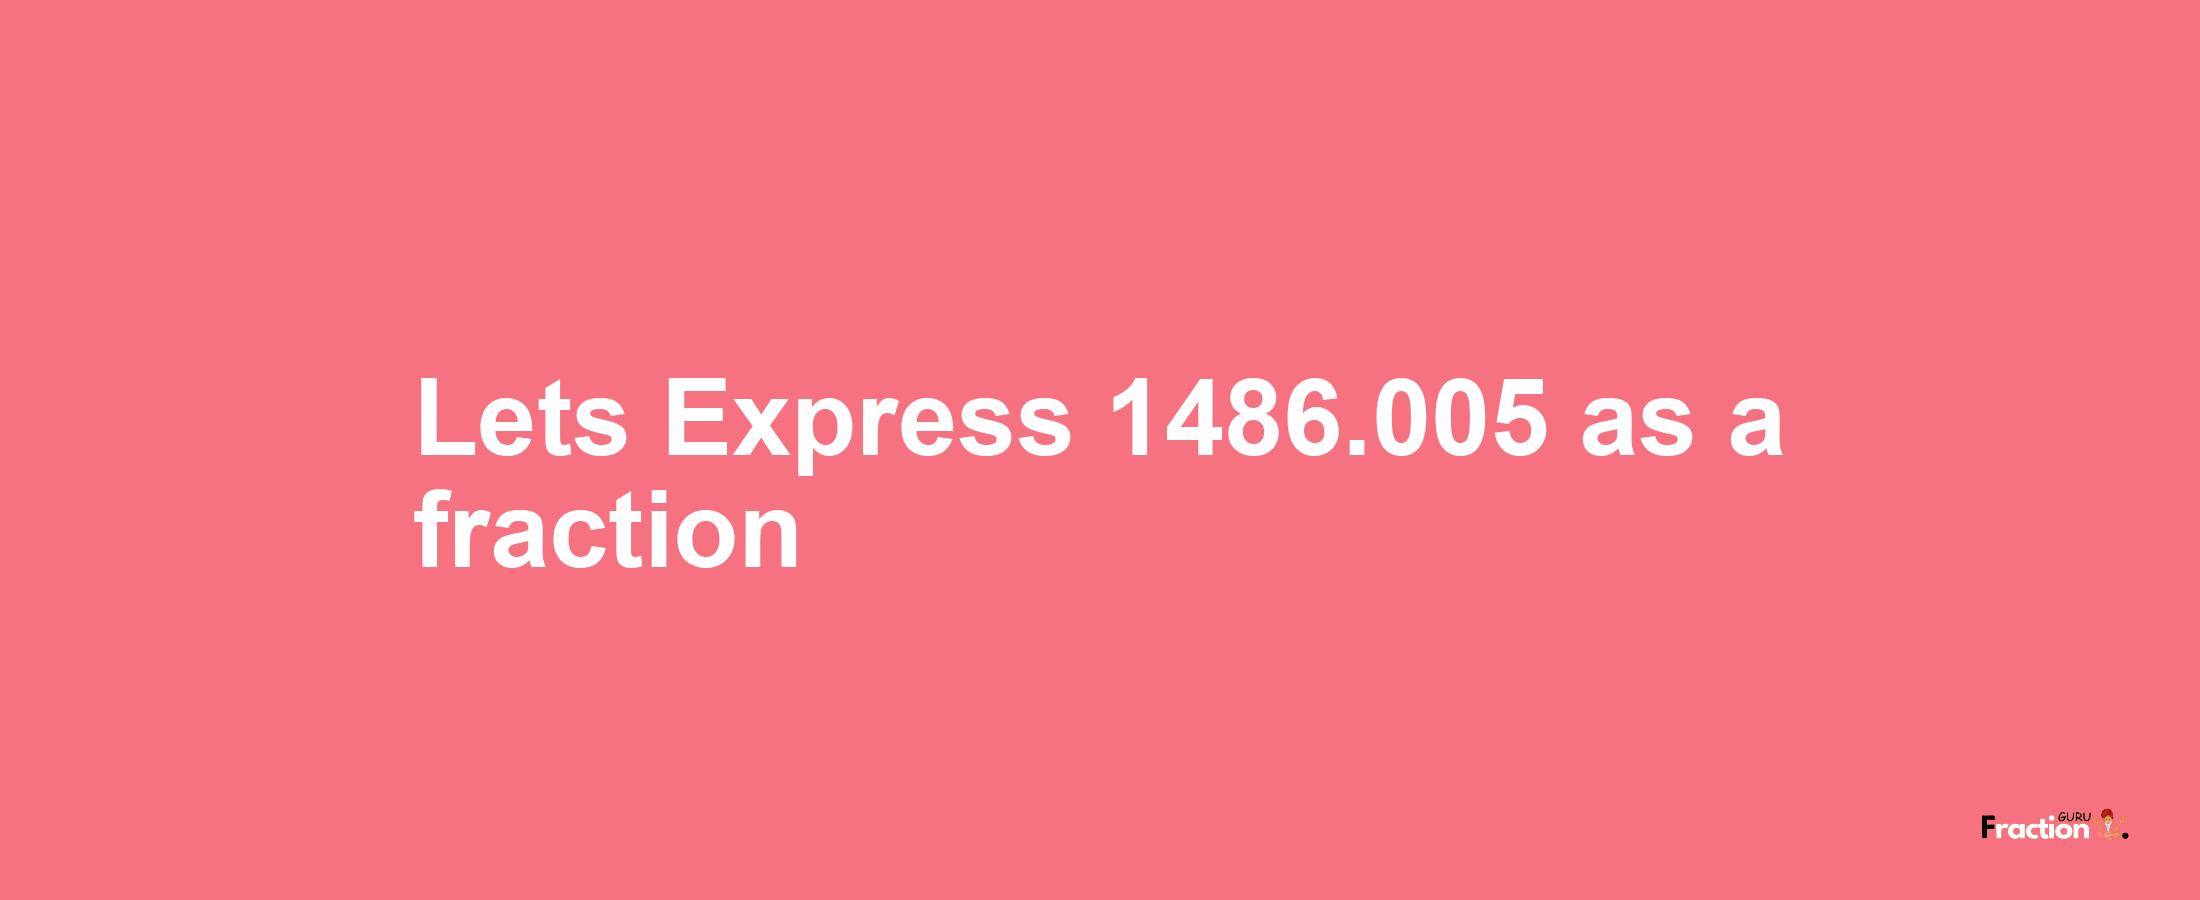 Lets Express 1486.005 as afraction